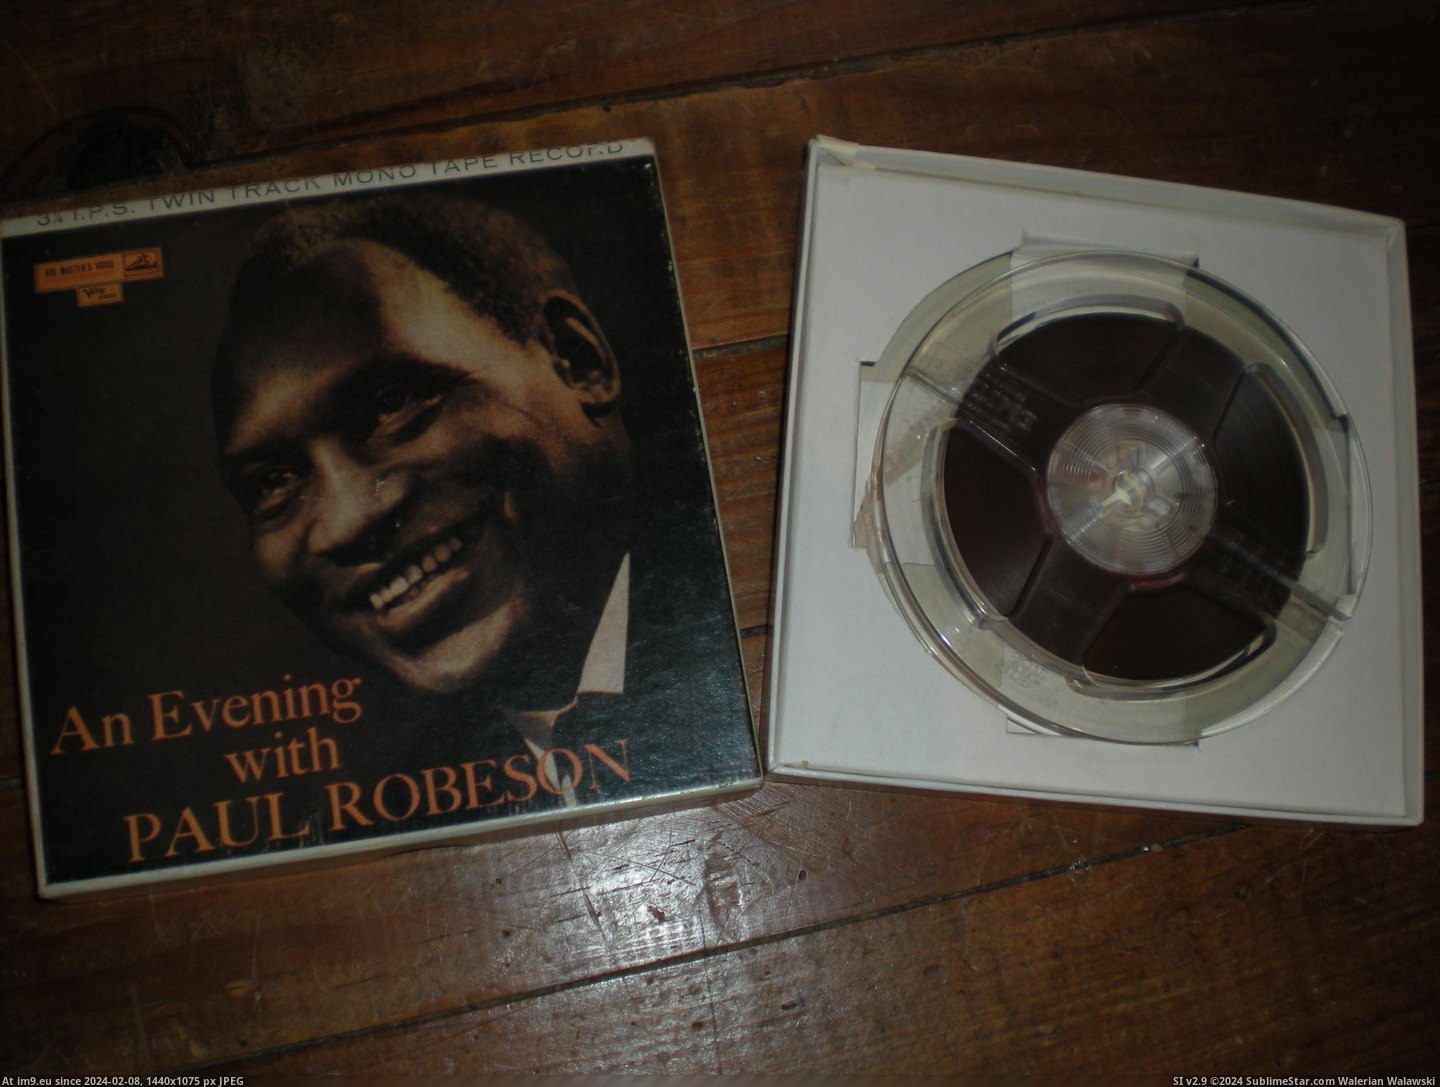  #Robeson  Robeson 1 Pic. (Image of album new 1))